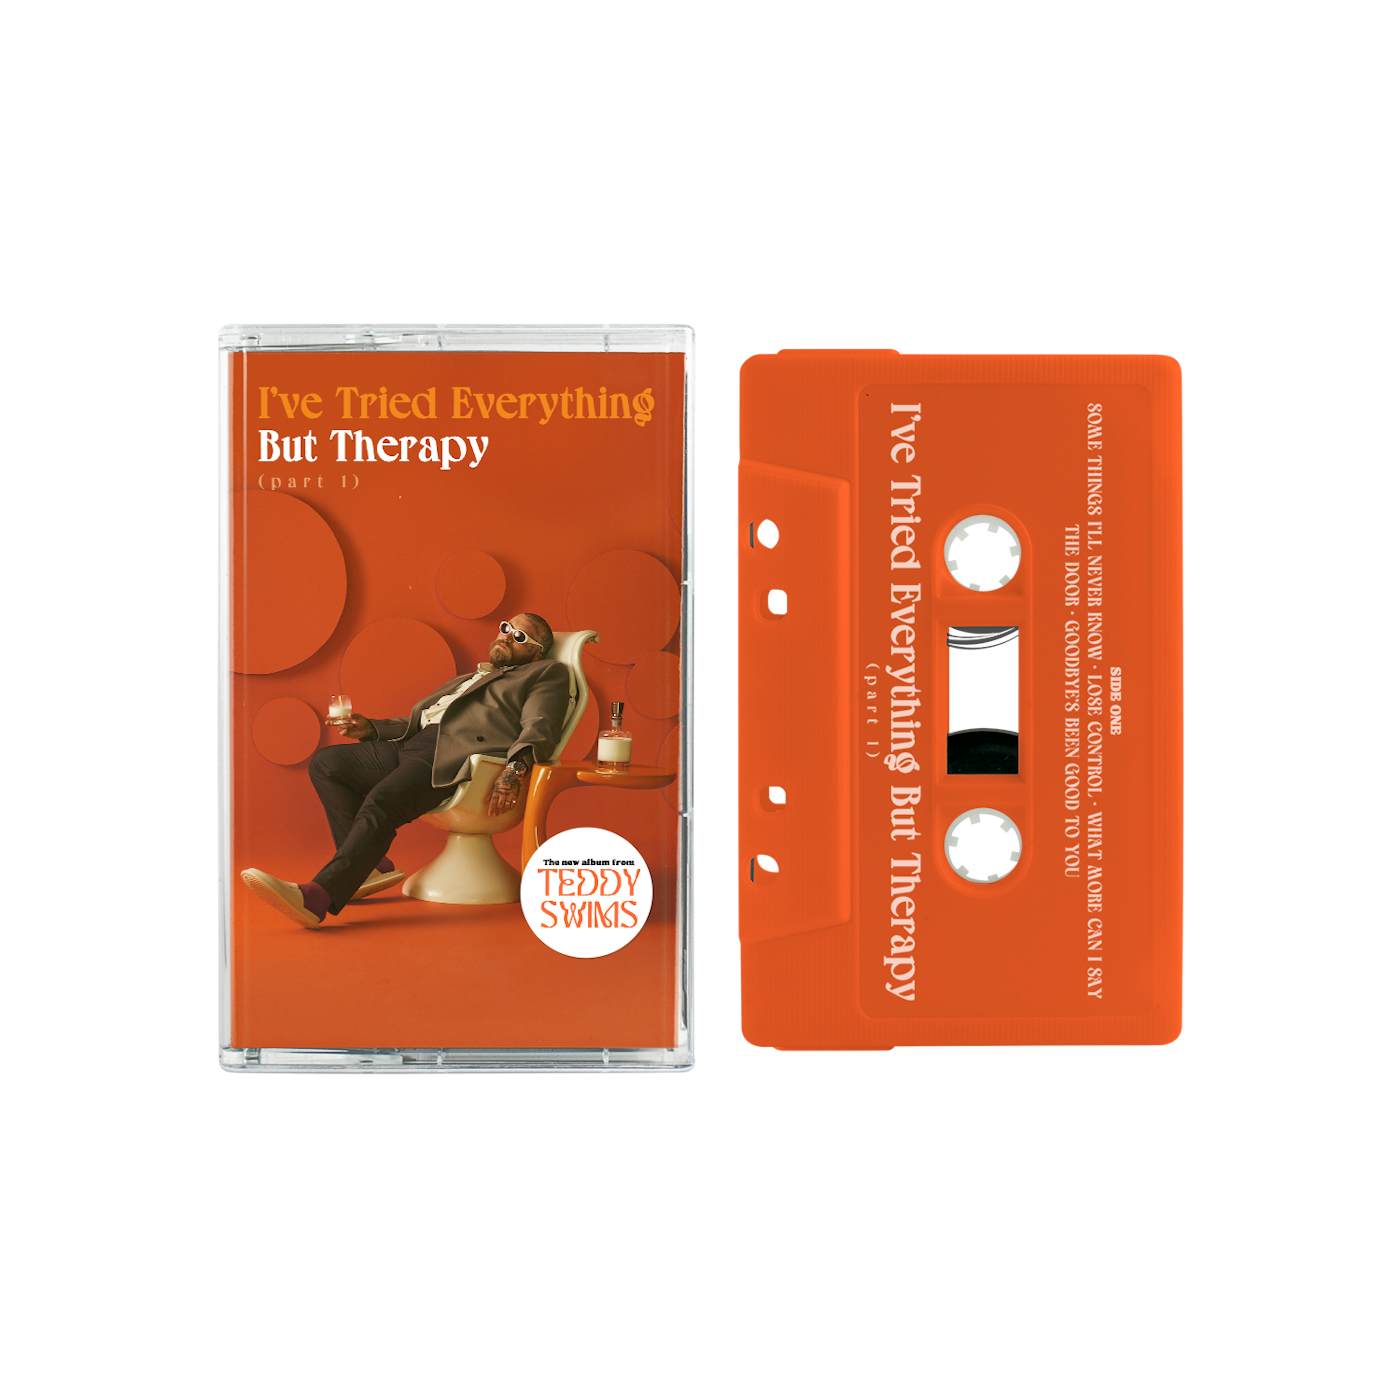 Teddy Swims - I've Tried Everything But Therapy (Part 1) - CD 